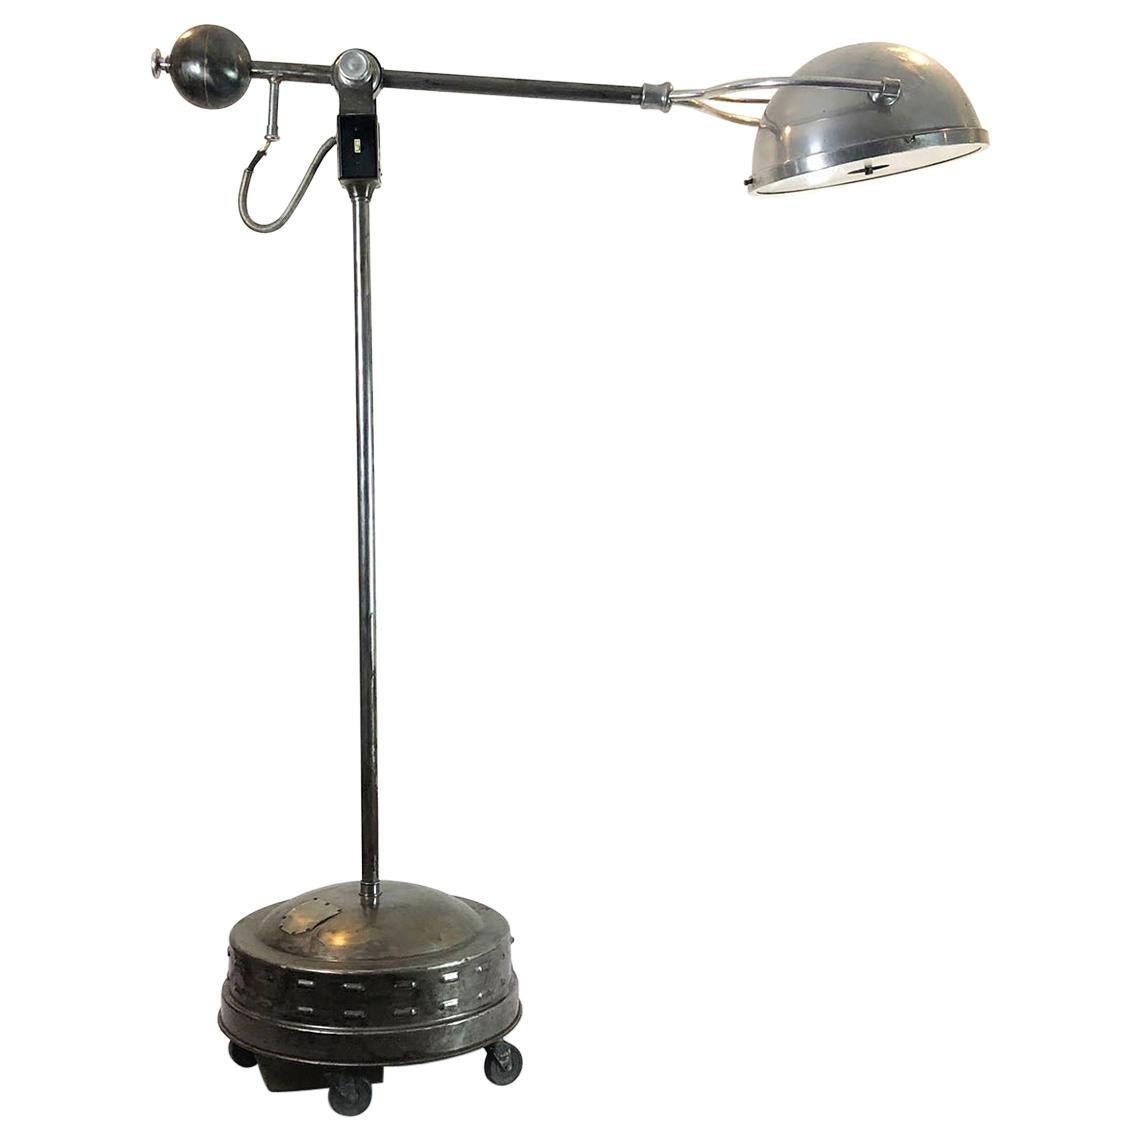 Big Size Hospital Surgery Lamp by the Ohio Chemical & Mfg. Co. For Sale